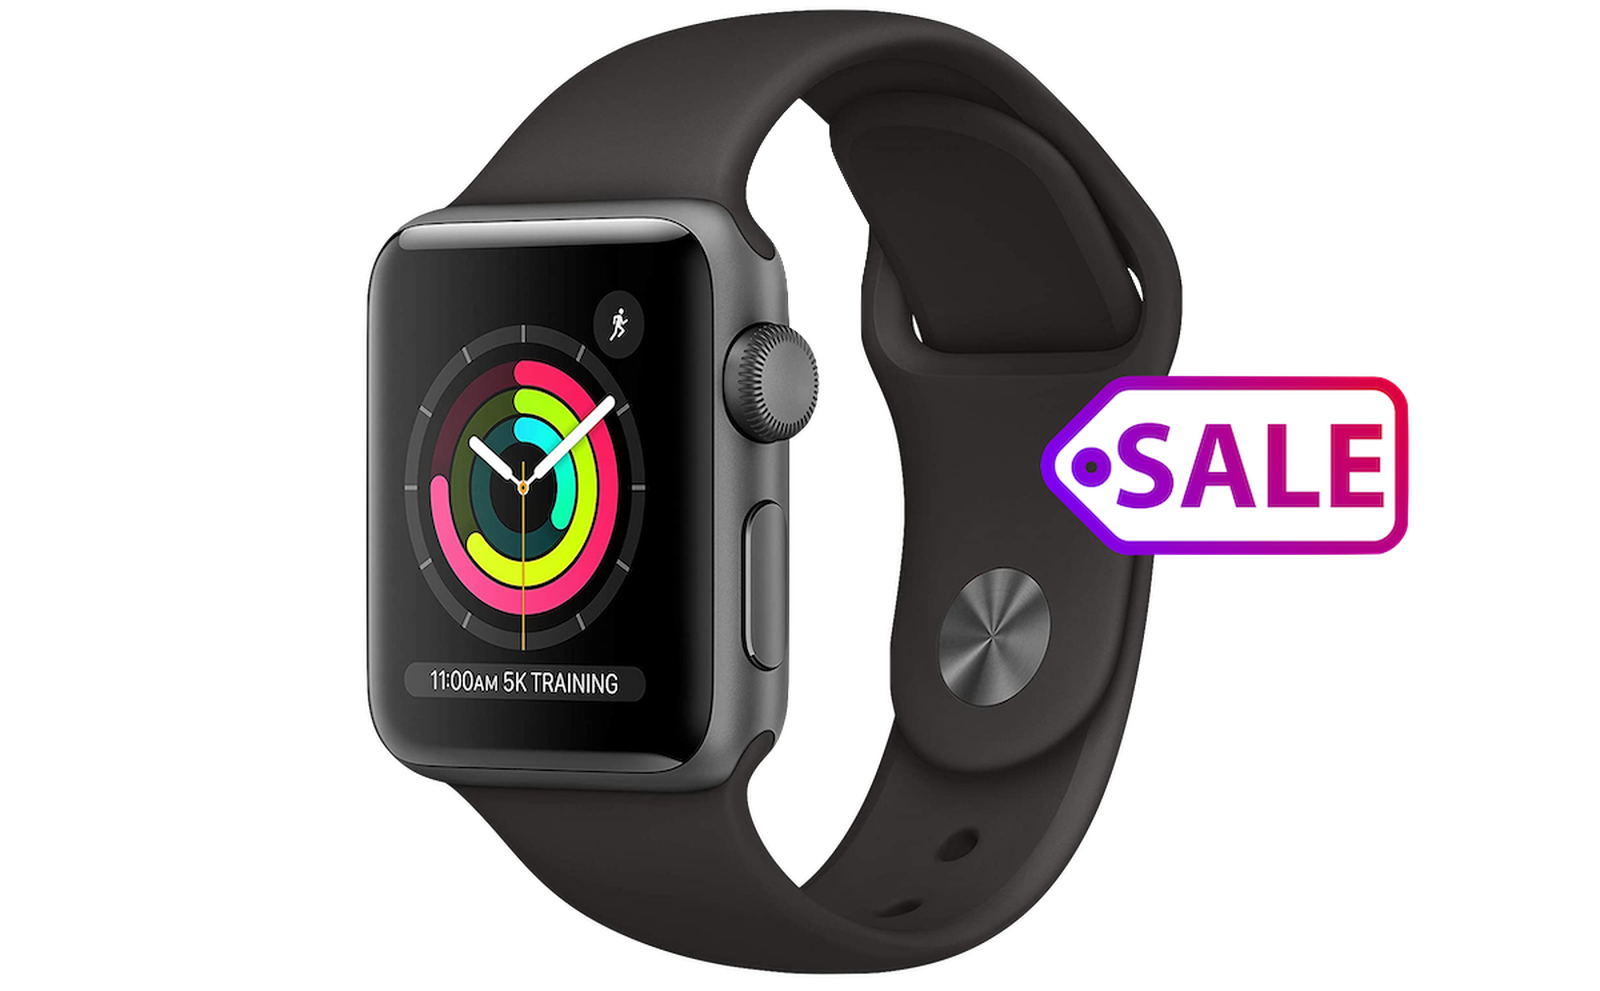 Deals: Amazon Discounting Apple Watch Series 3 by $30, Starting at